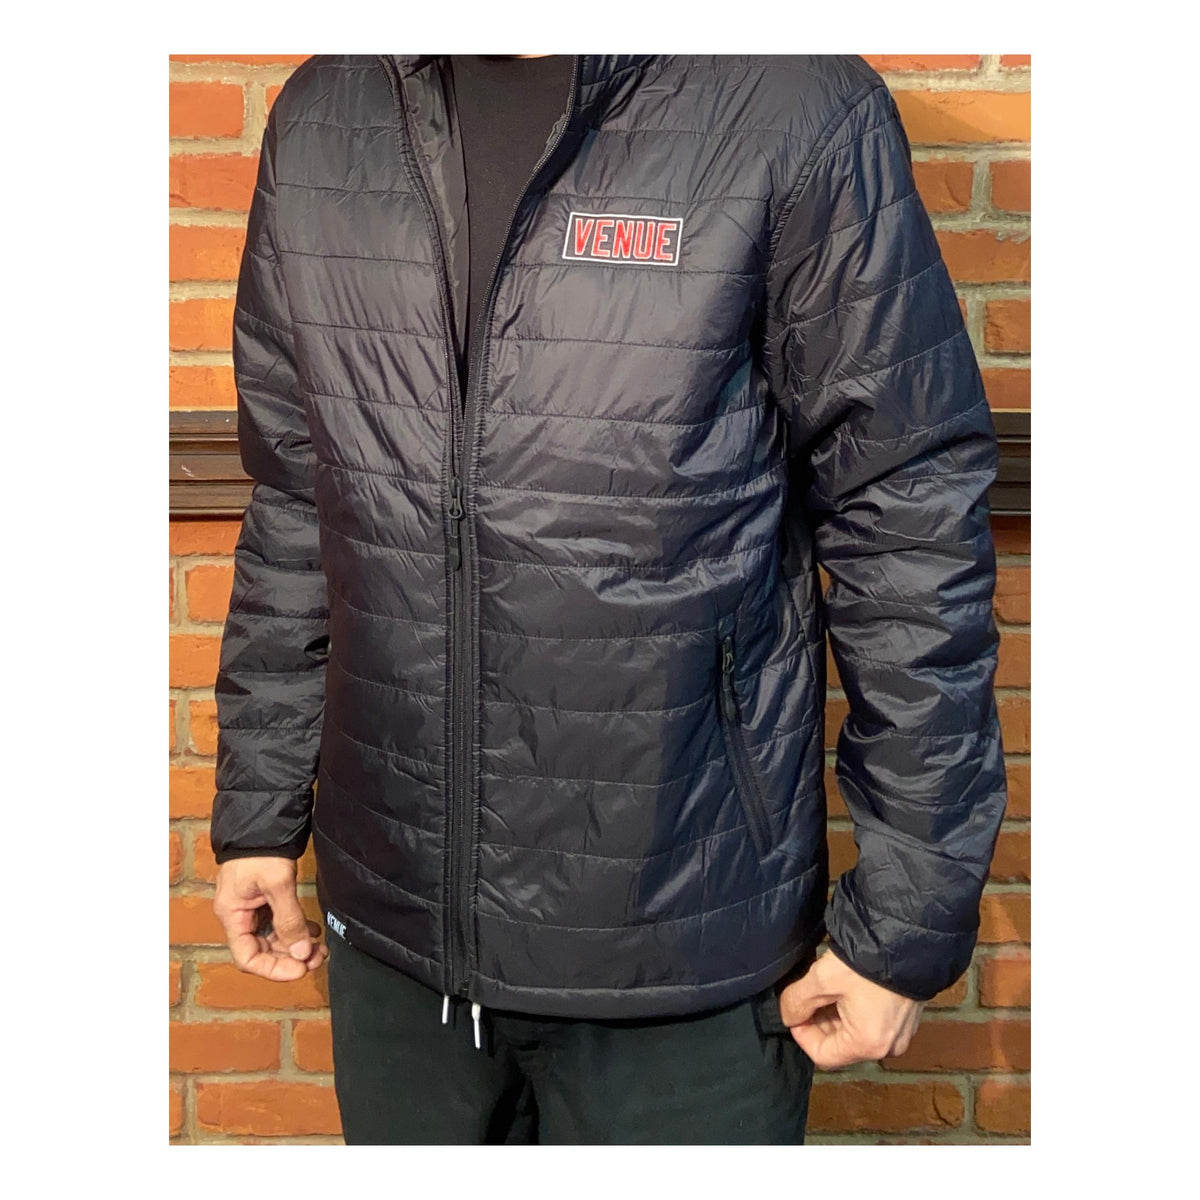 Venue Embroidered Puffy Jacket Black